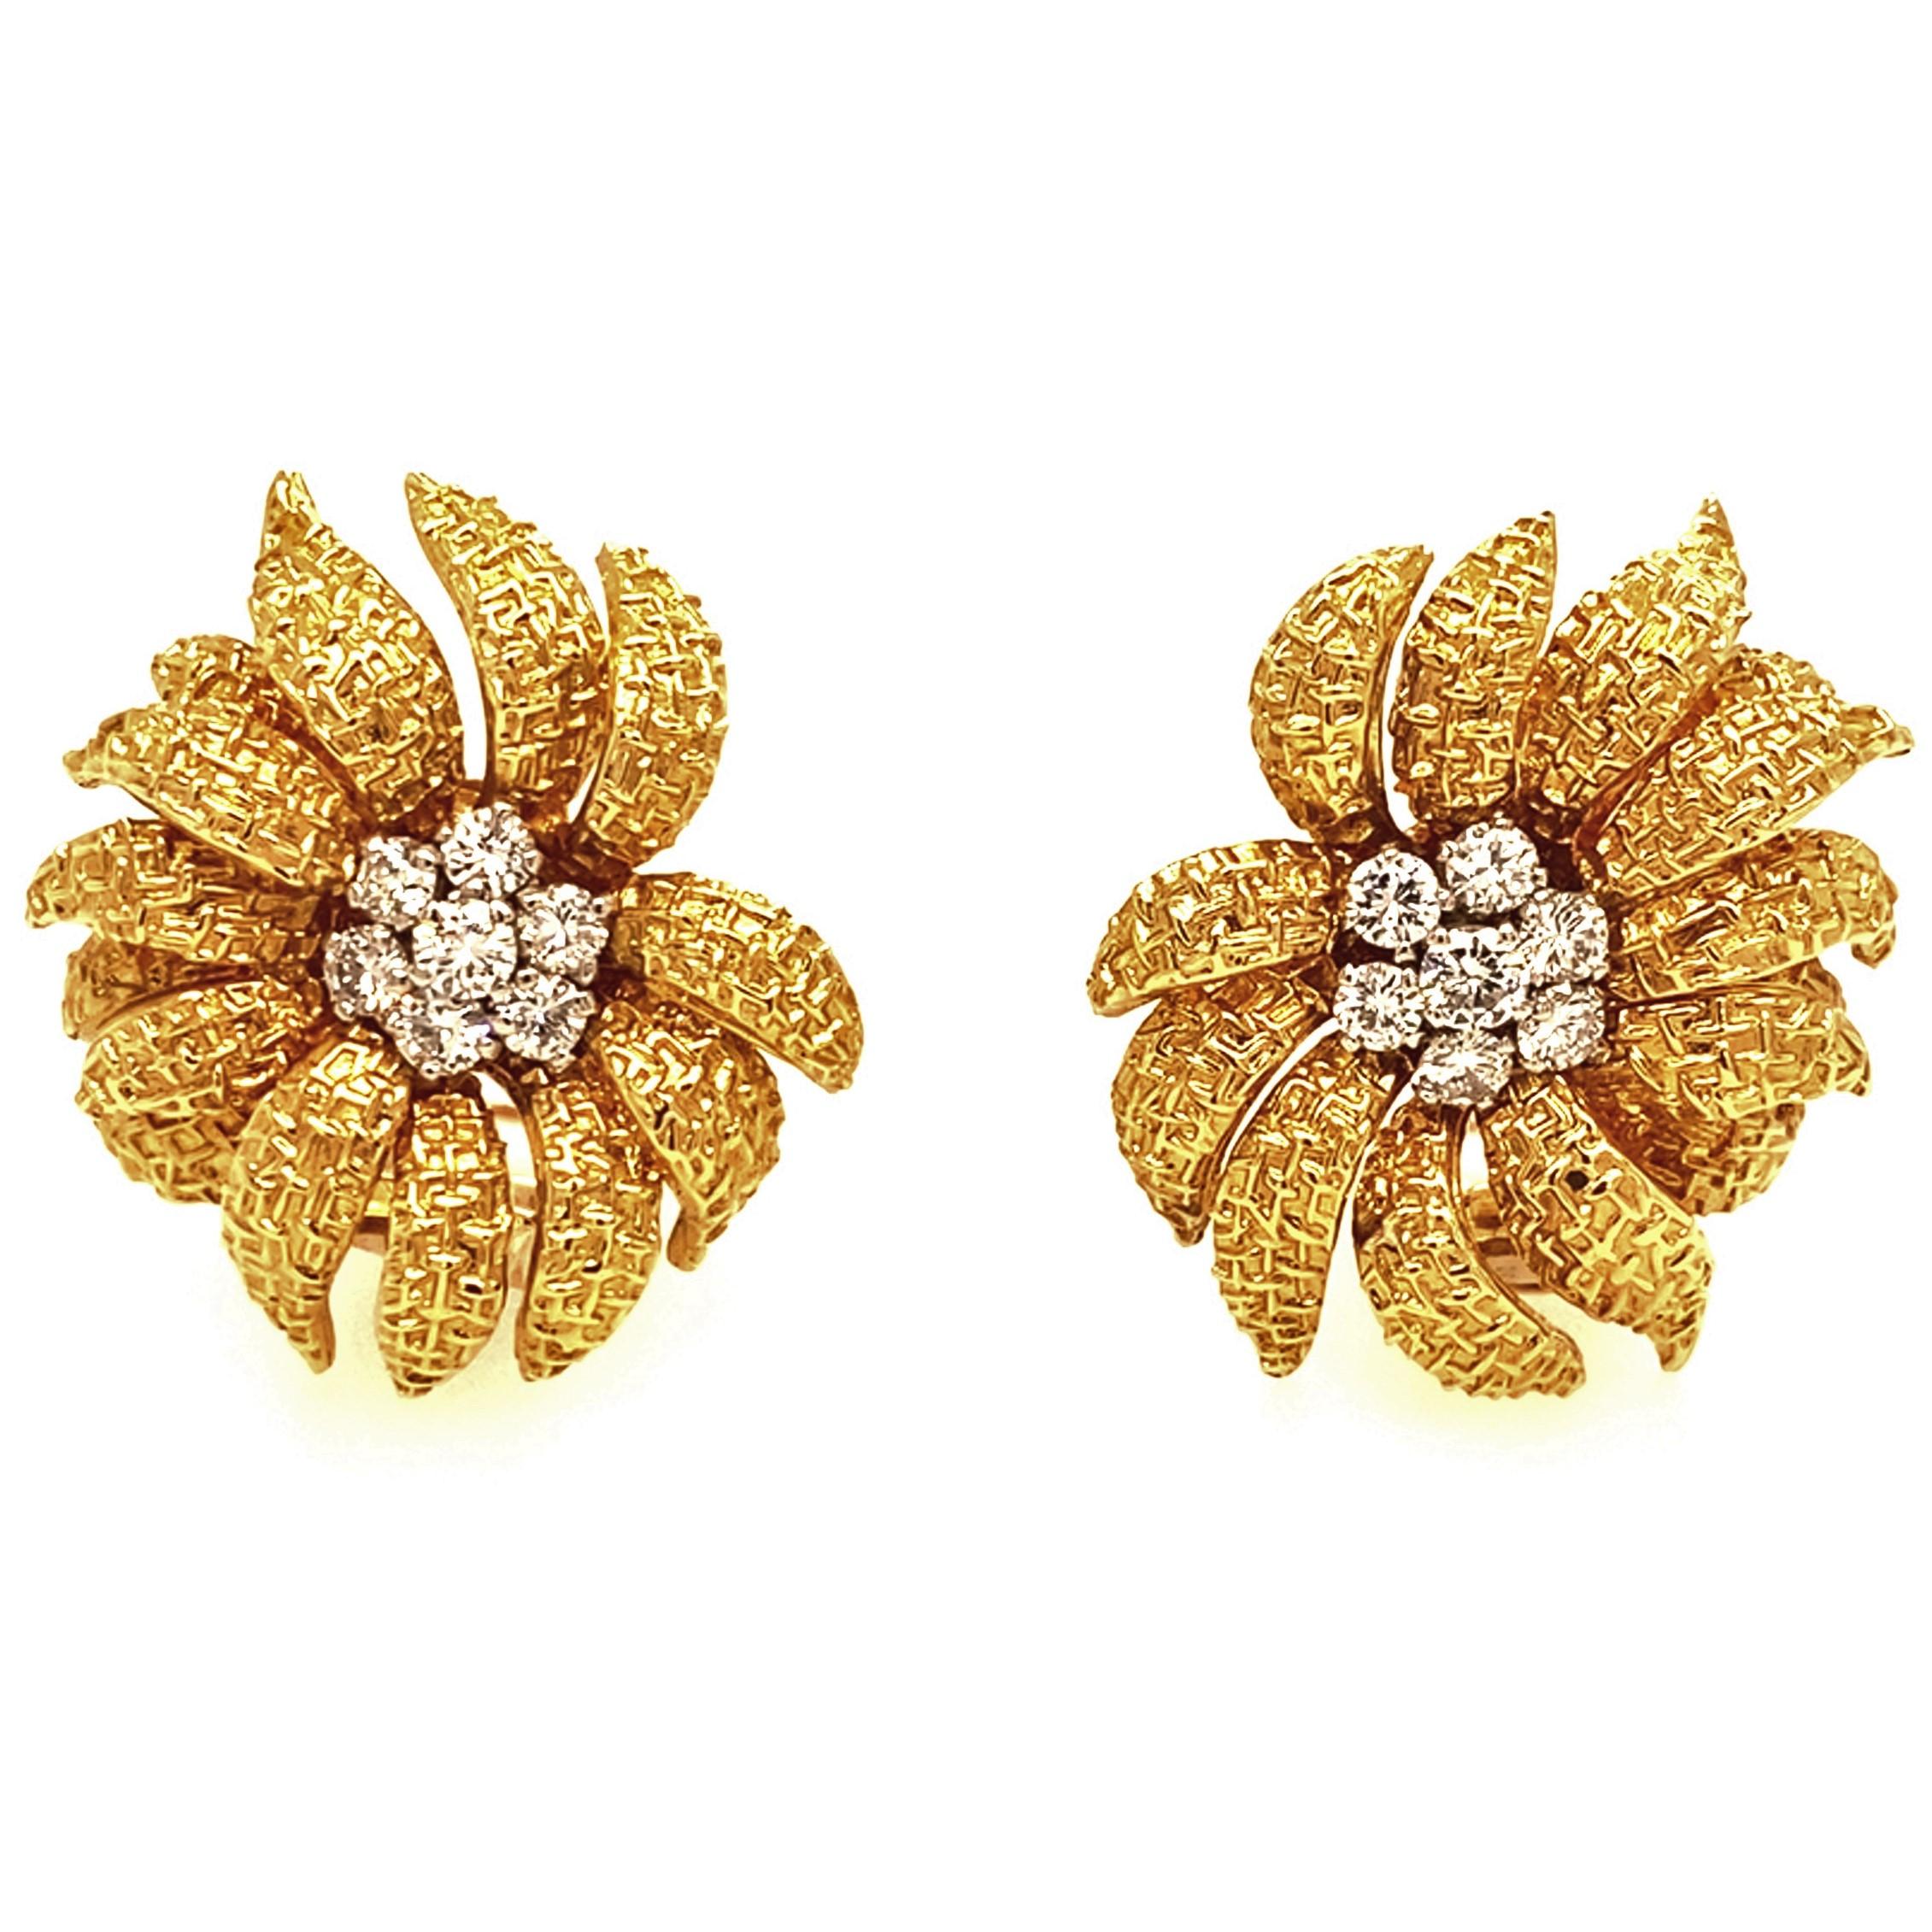 18 karat gold and diamond vintage ear clips by Van Cleef & Arpels.
Glamorous flower earrings featuring finely textured yellow gold petals, each centred by a cluster of brilliant-cut diamonds totalling 1.38 carats. They are completed by 18 karat